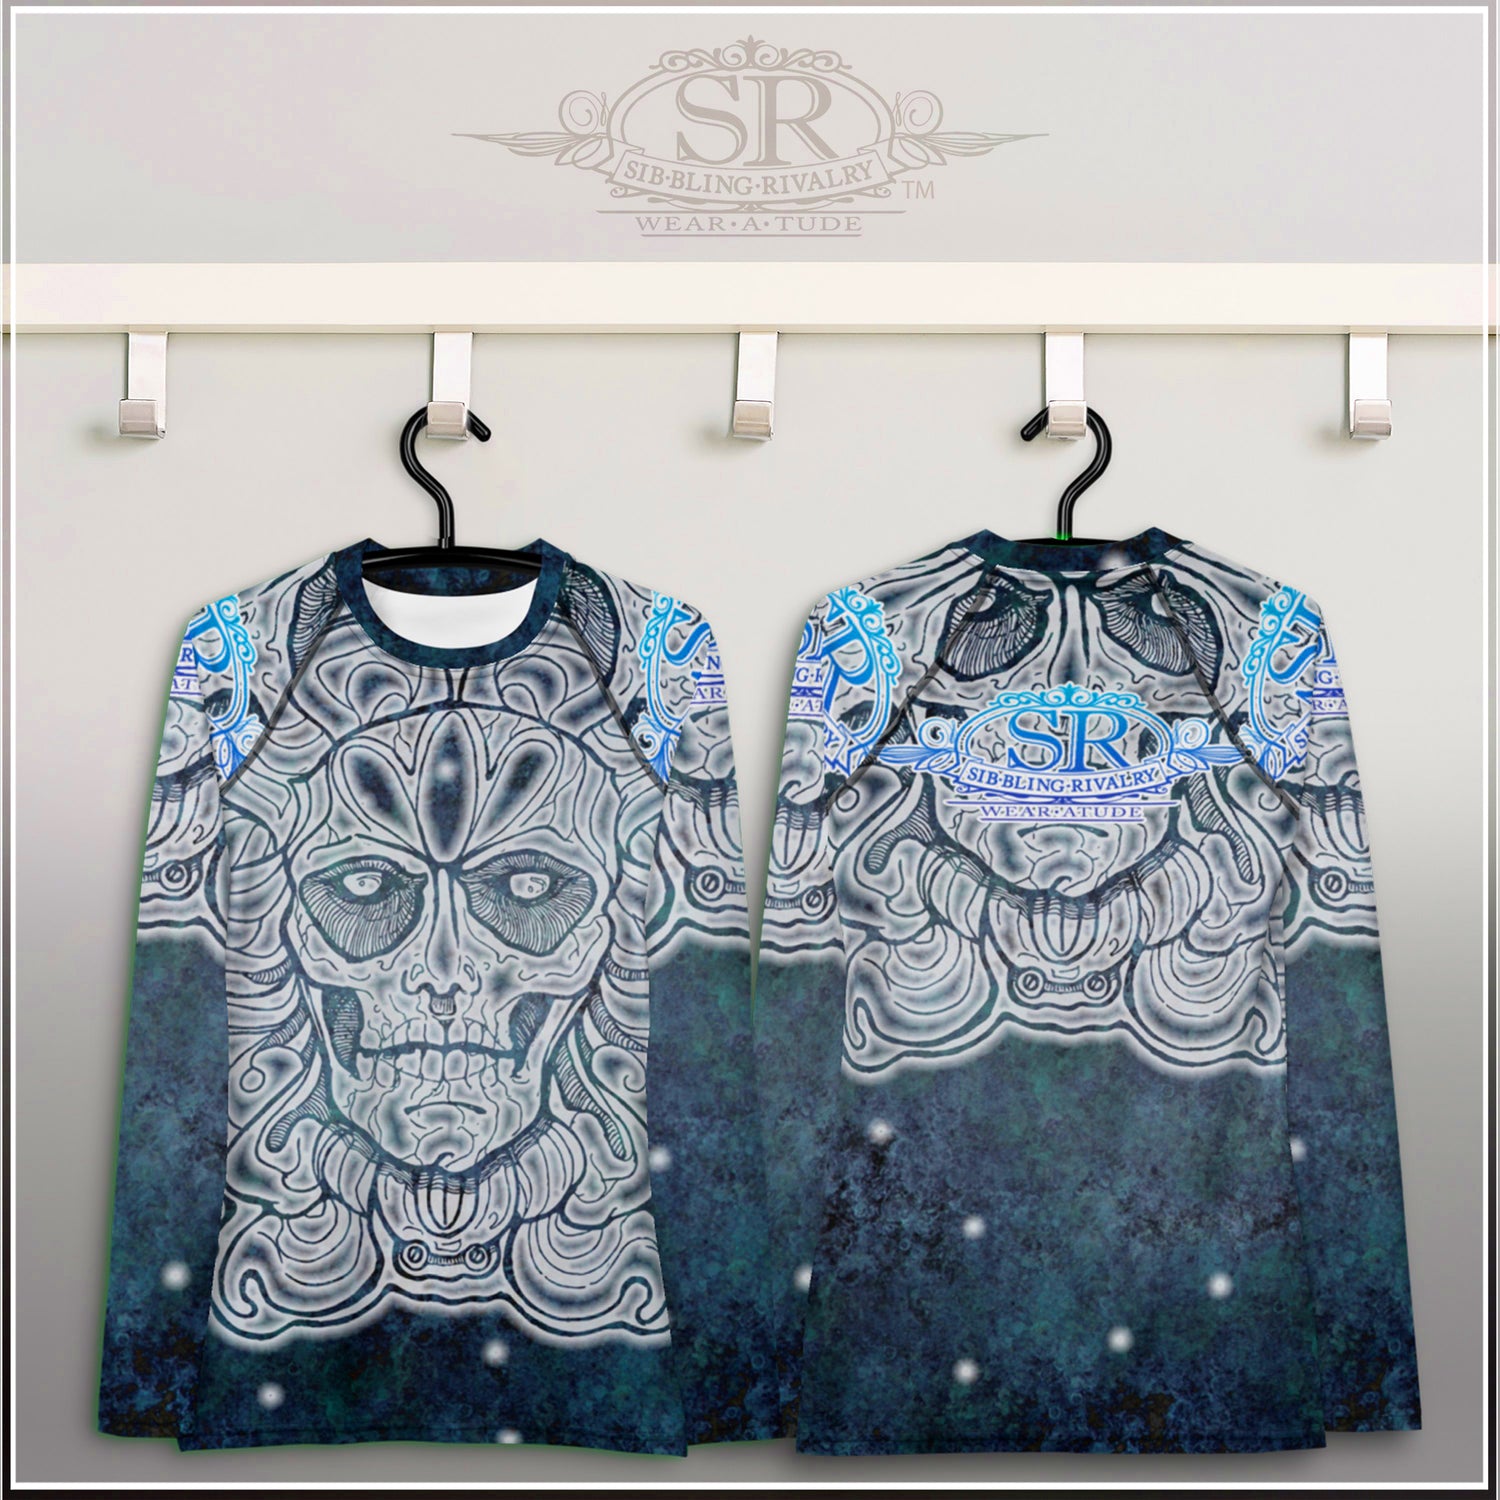 SUGAR & SNOW Wear A Tude clothing by SibBling Rivalry Design. Our striking Sugar Skull design on a form fitting sports shirt. 